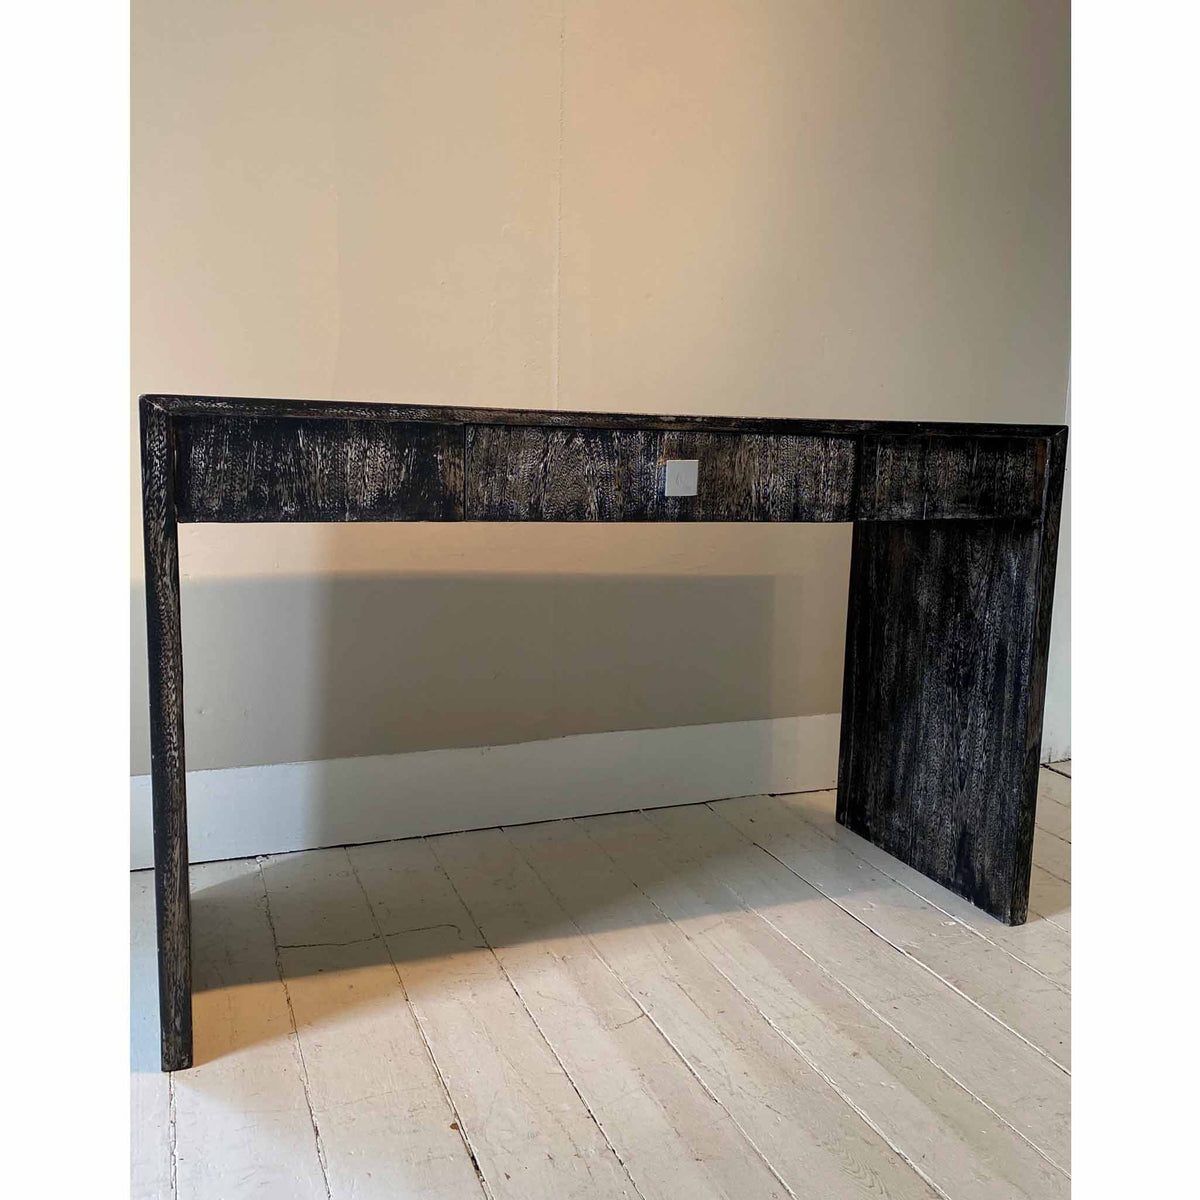 VINTAGE WATERFALL CONSOLE TABLE/DESK